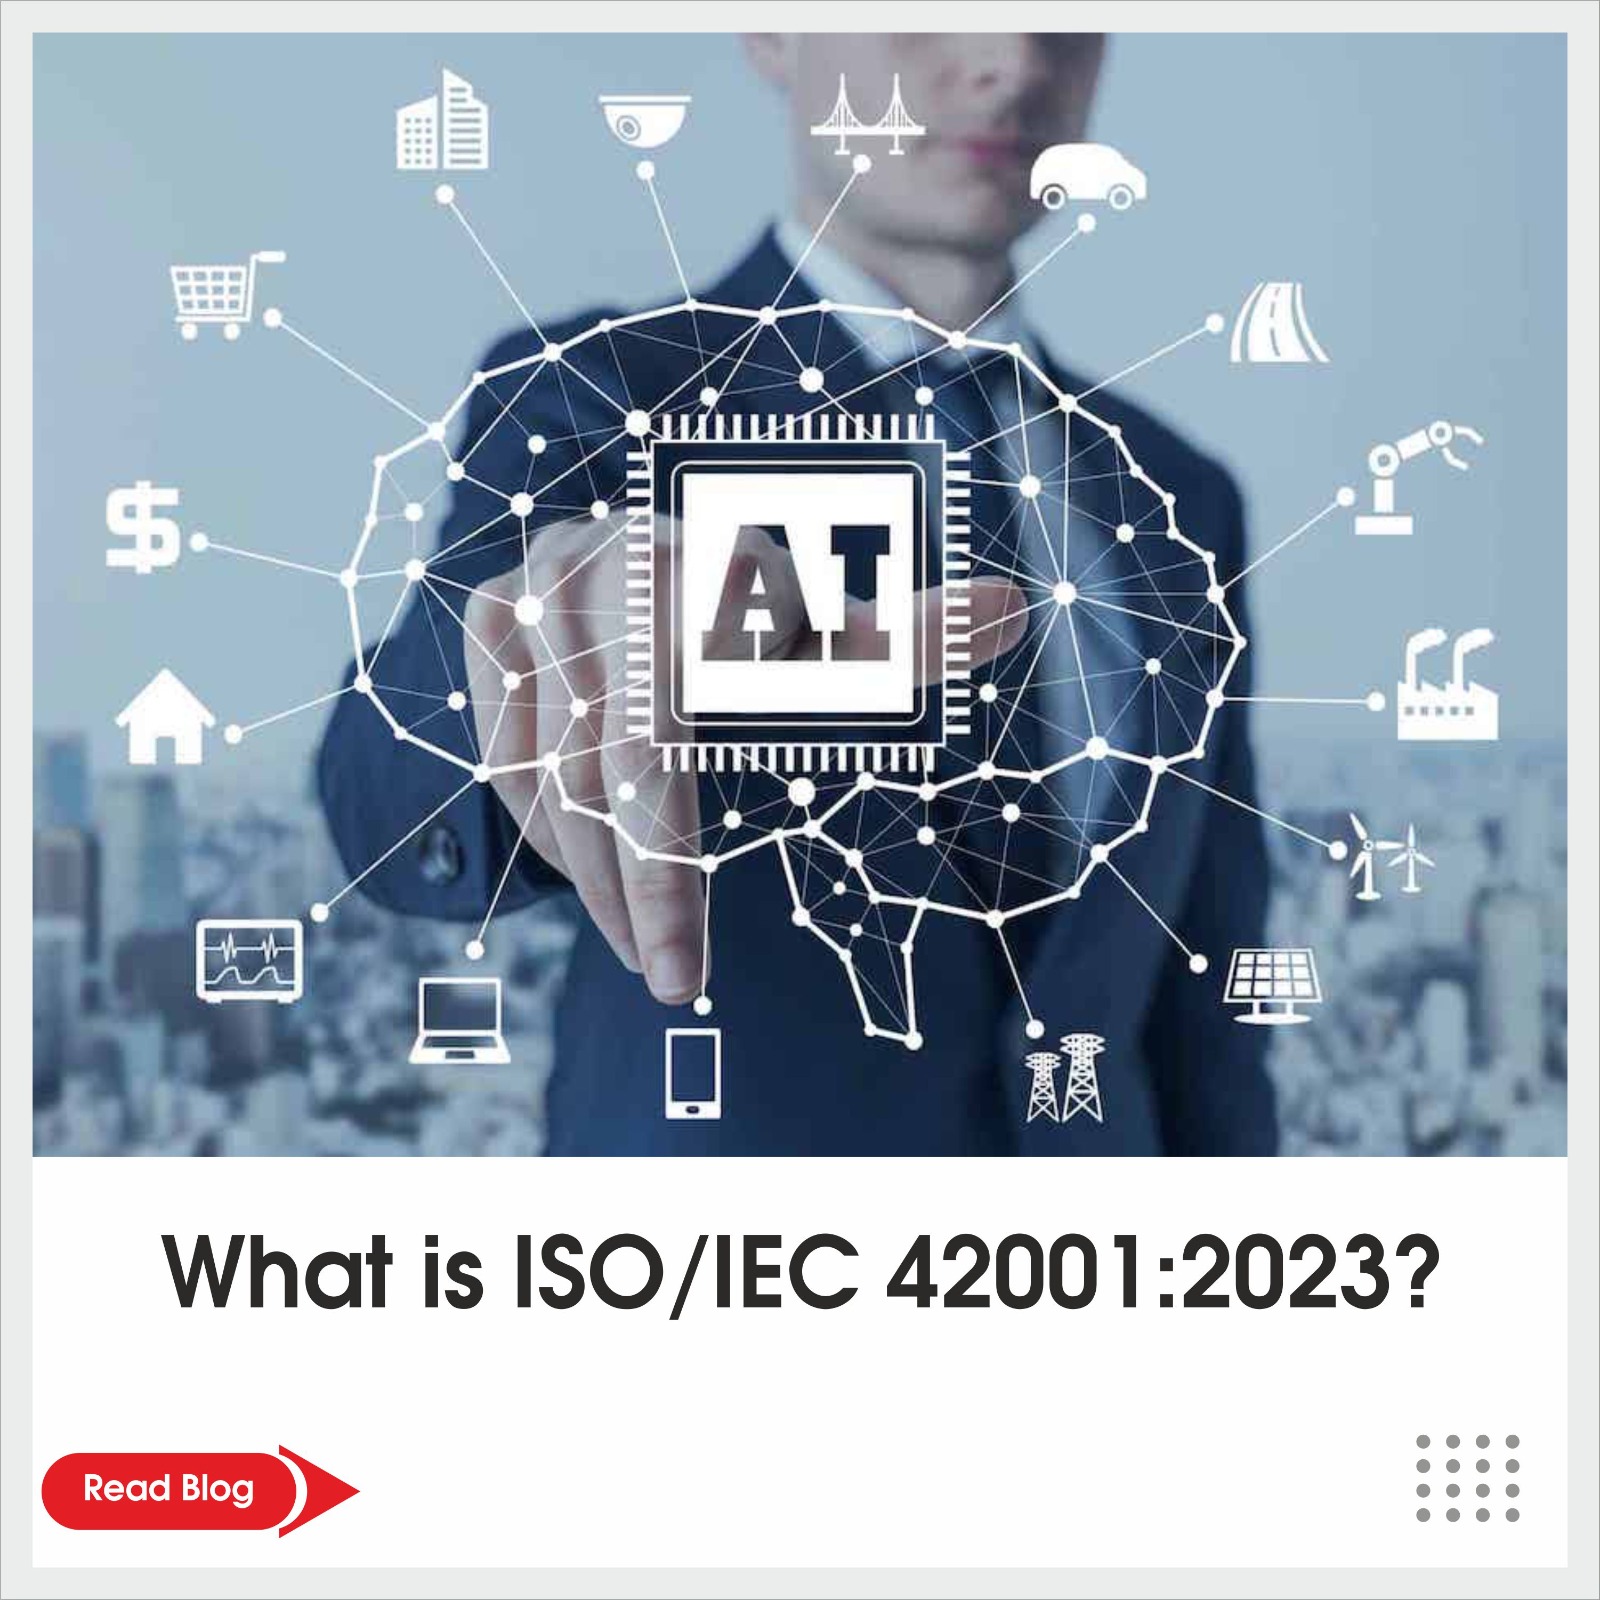 What is ISO/IEC 42001:2023?